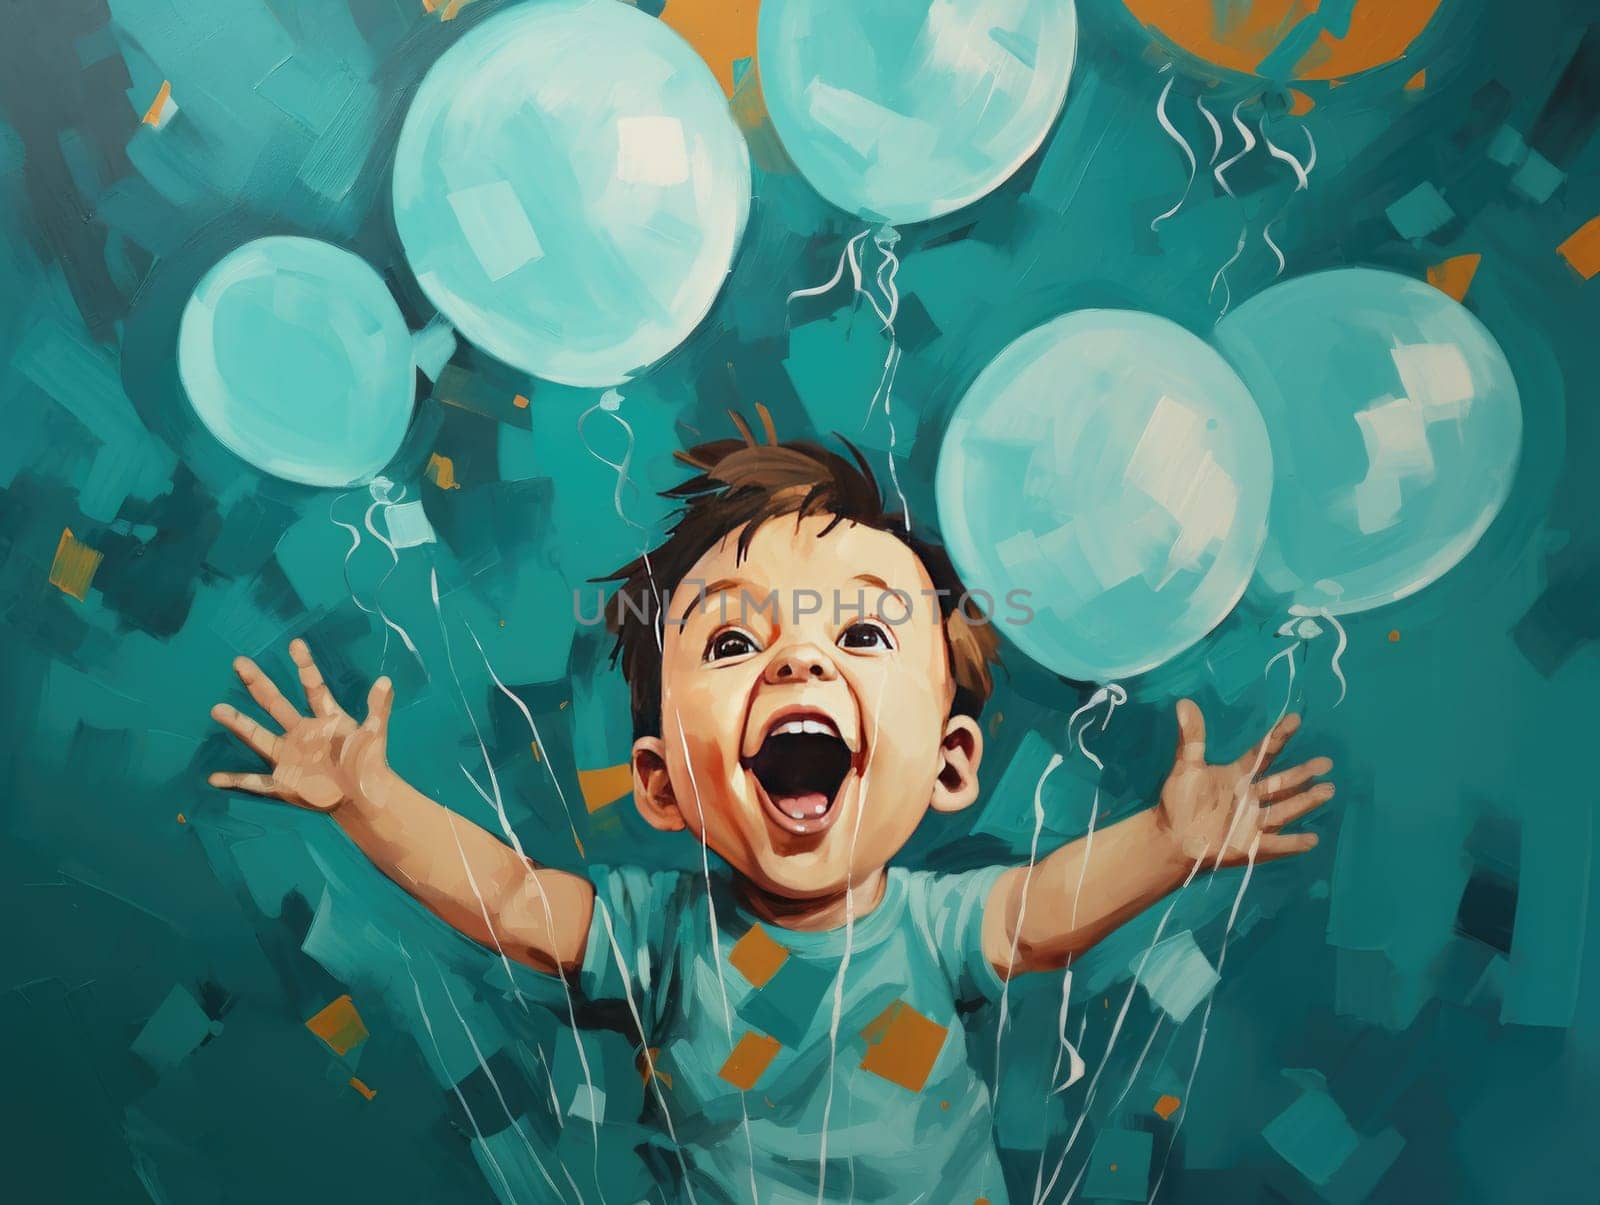 Baby surprise concept, happy kid with a balloons